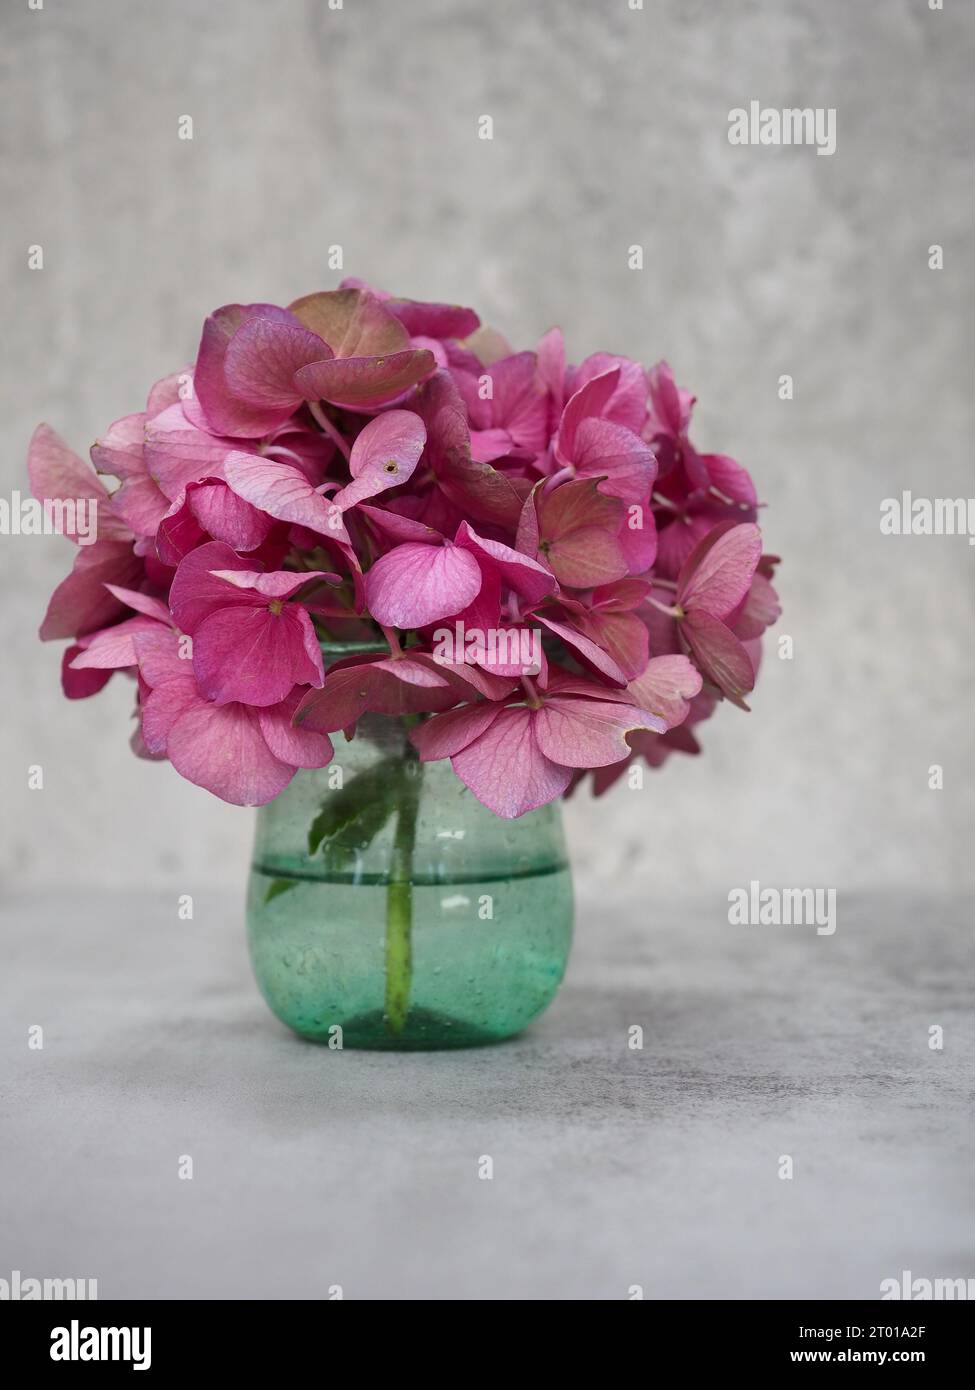 Close up of a pink hydrangea flowerhead in a green vase against a plain grey marble background Stock Photo